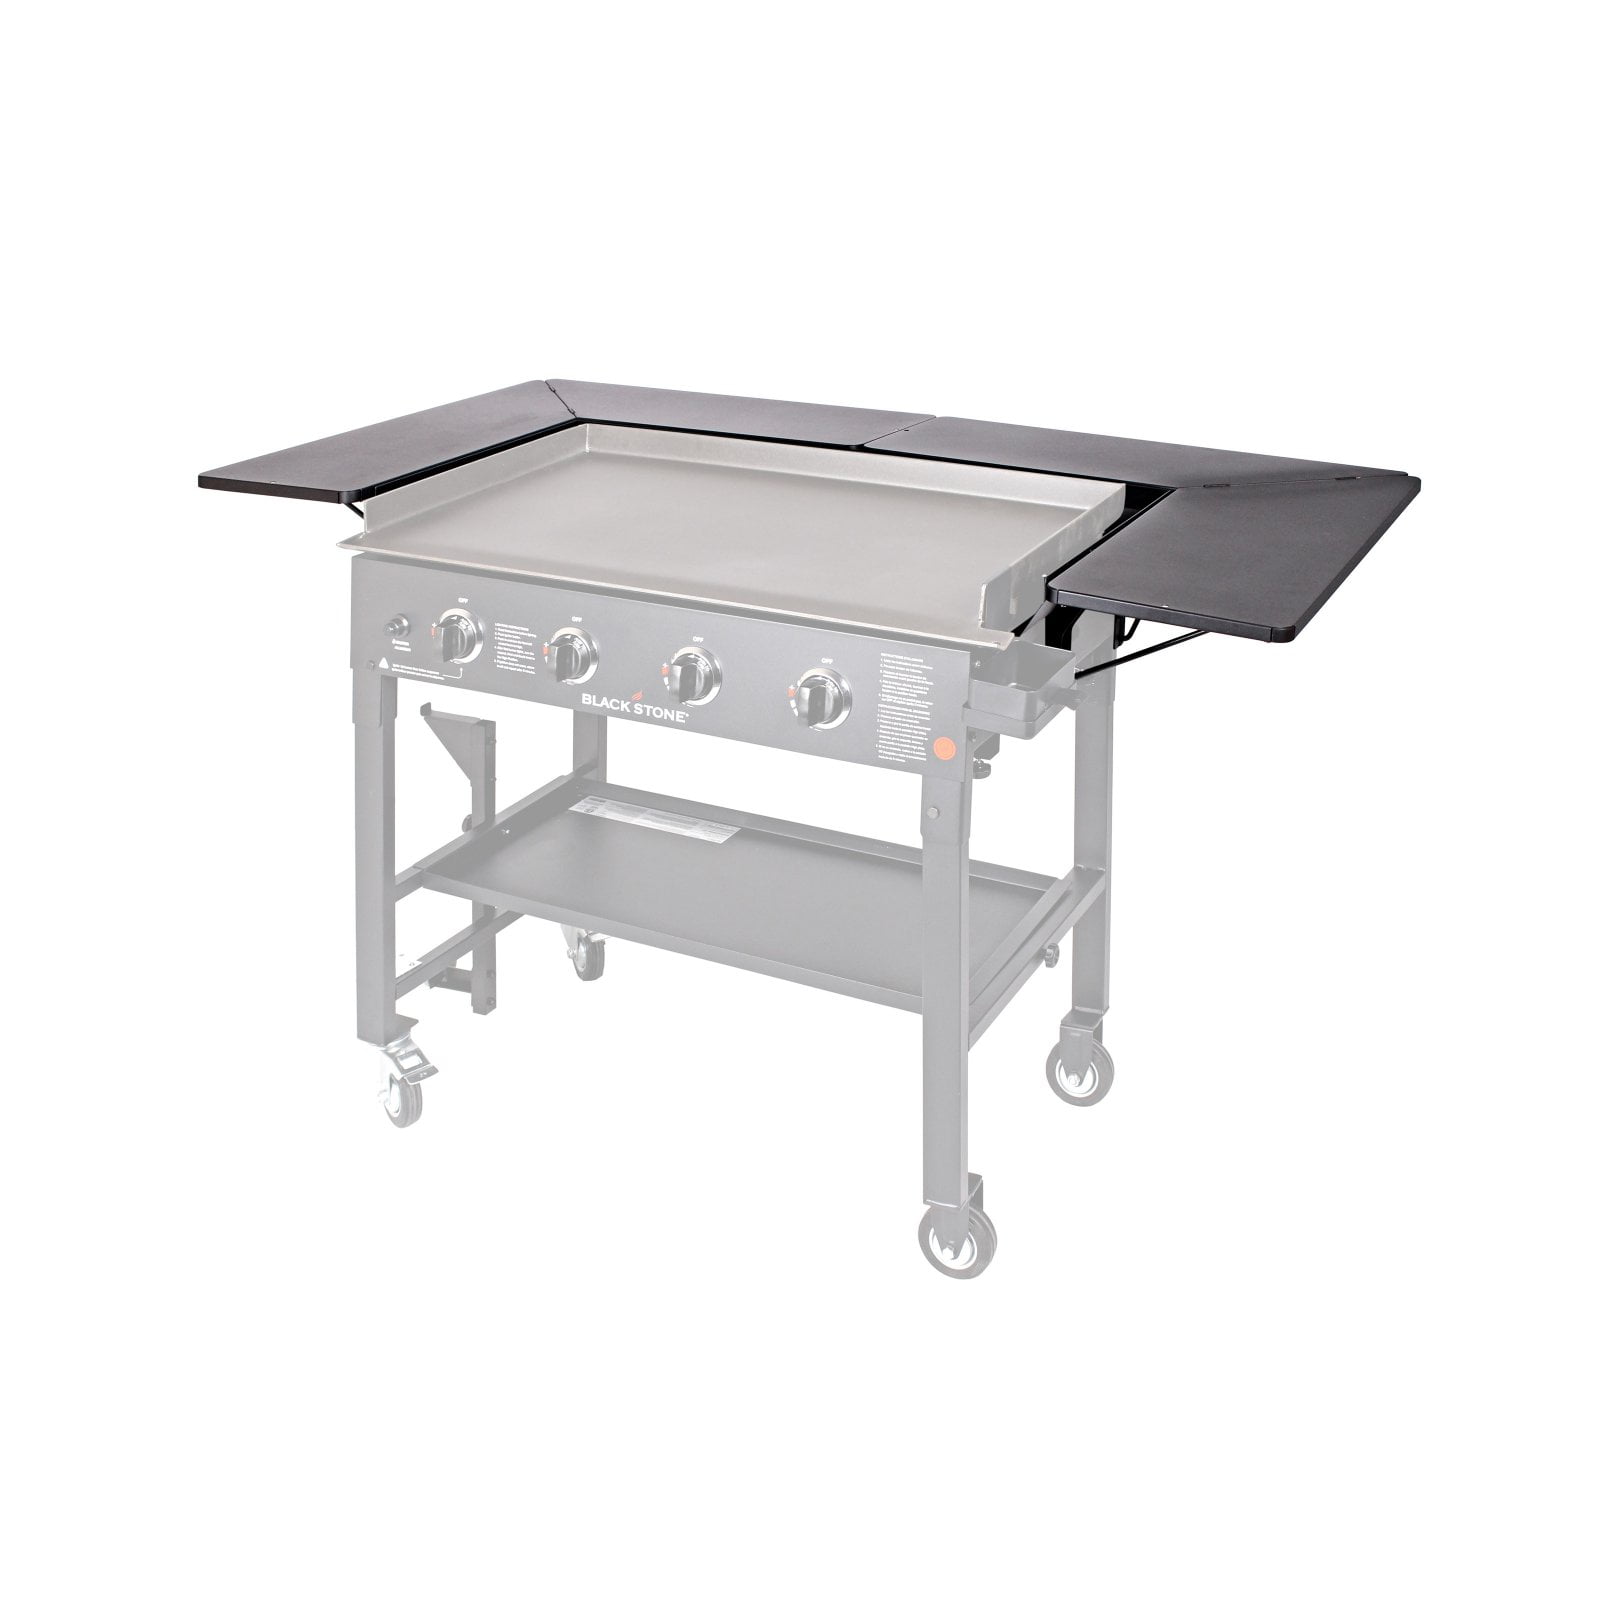 36 Inch Griddle Surround Table Accessory Blackstone Signature Accessories Powder Coated Steel Grill not included and Doesnt fit the 36in Griddle with New Rear Grease Model Renewed